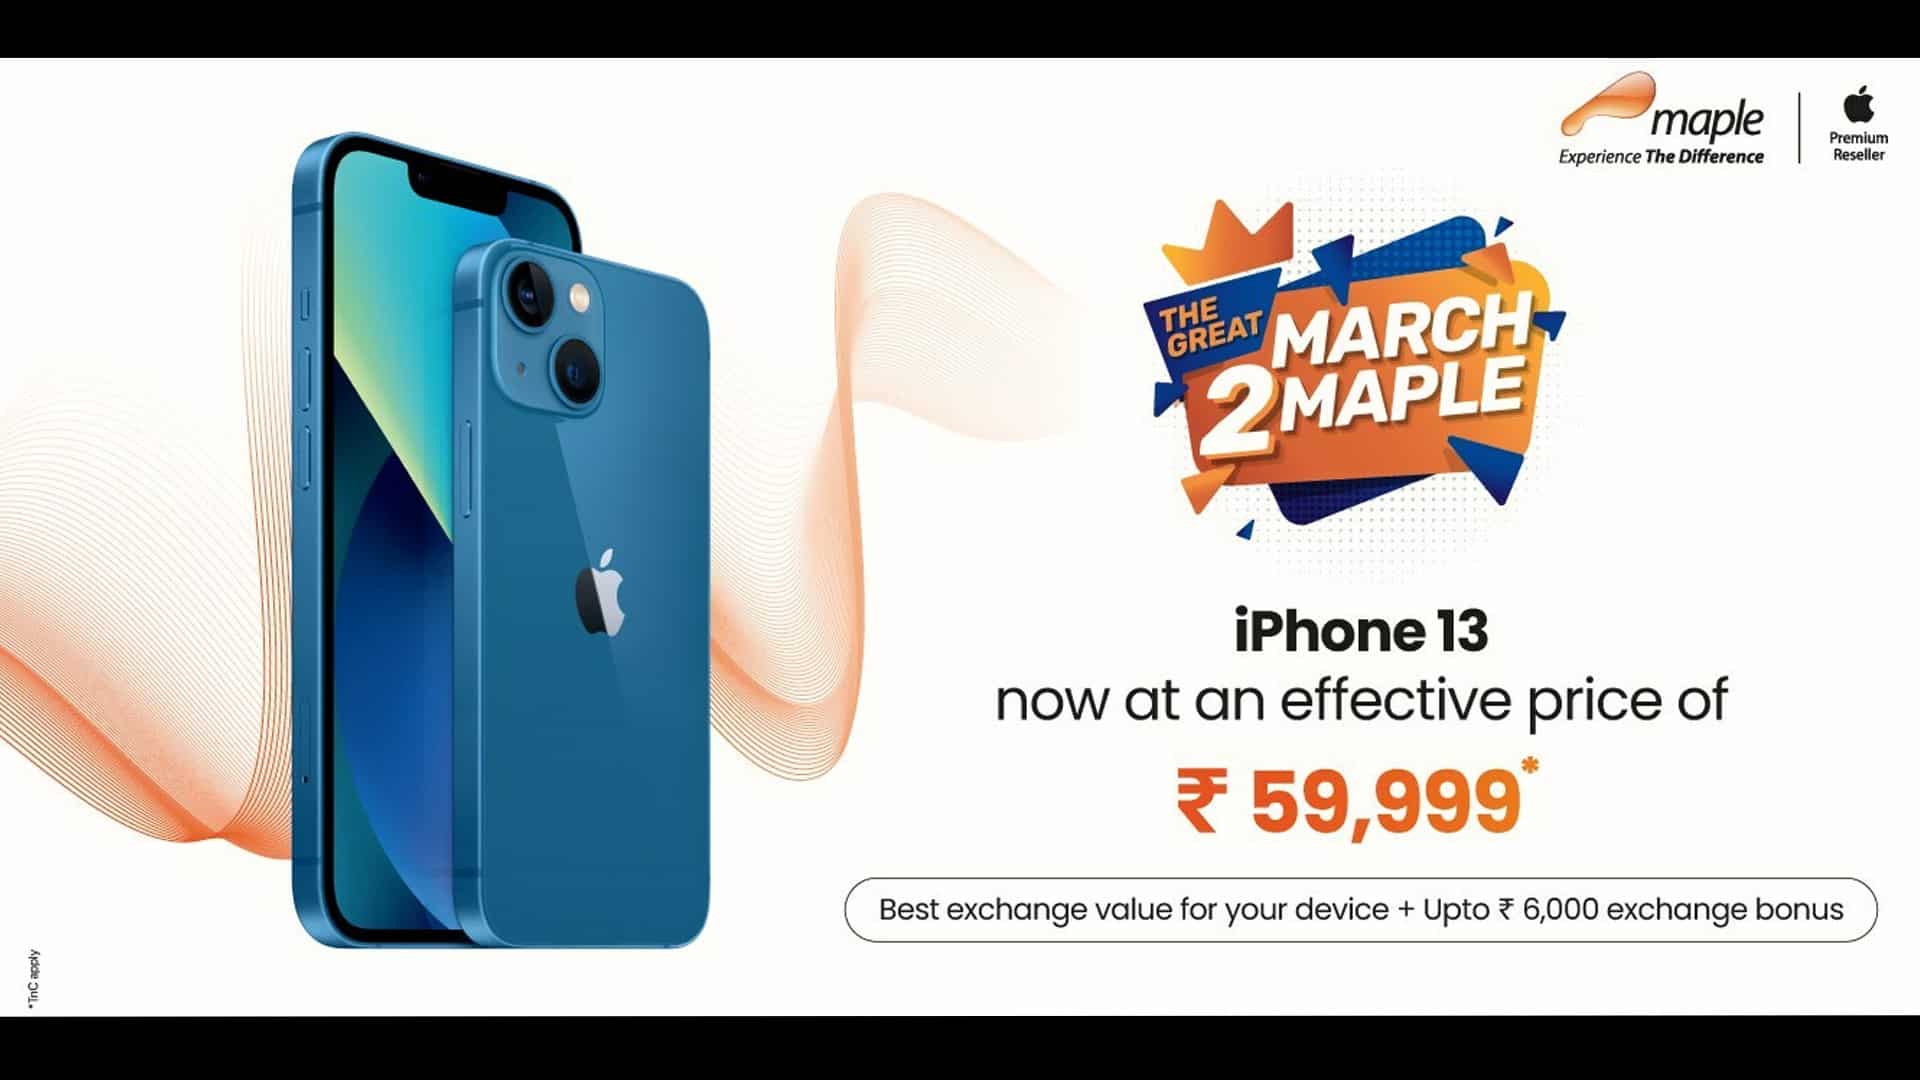 March2Maple Sale! Get iPhone 13 for just Rs. 59,999.